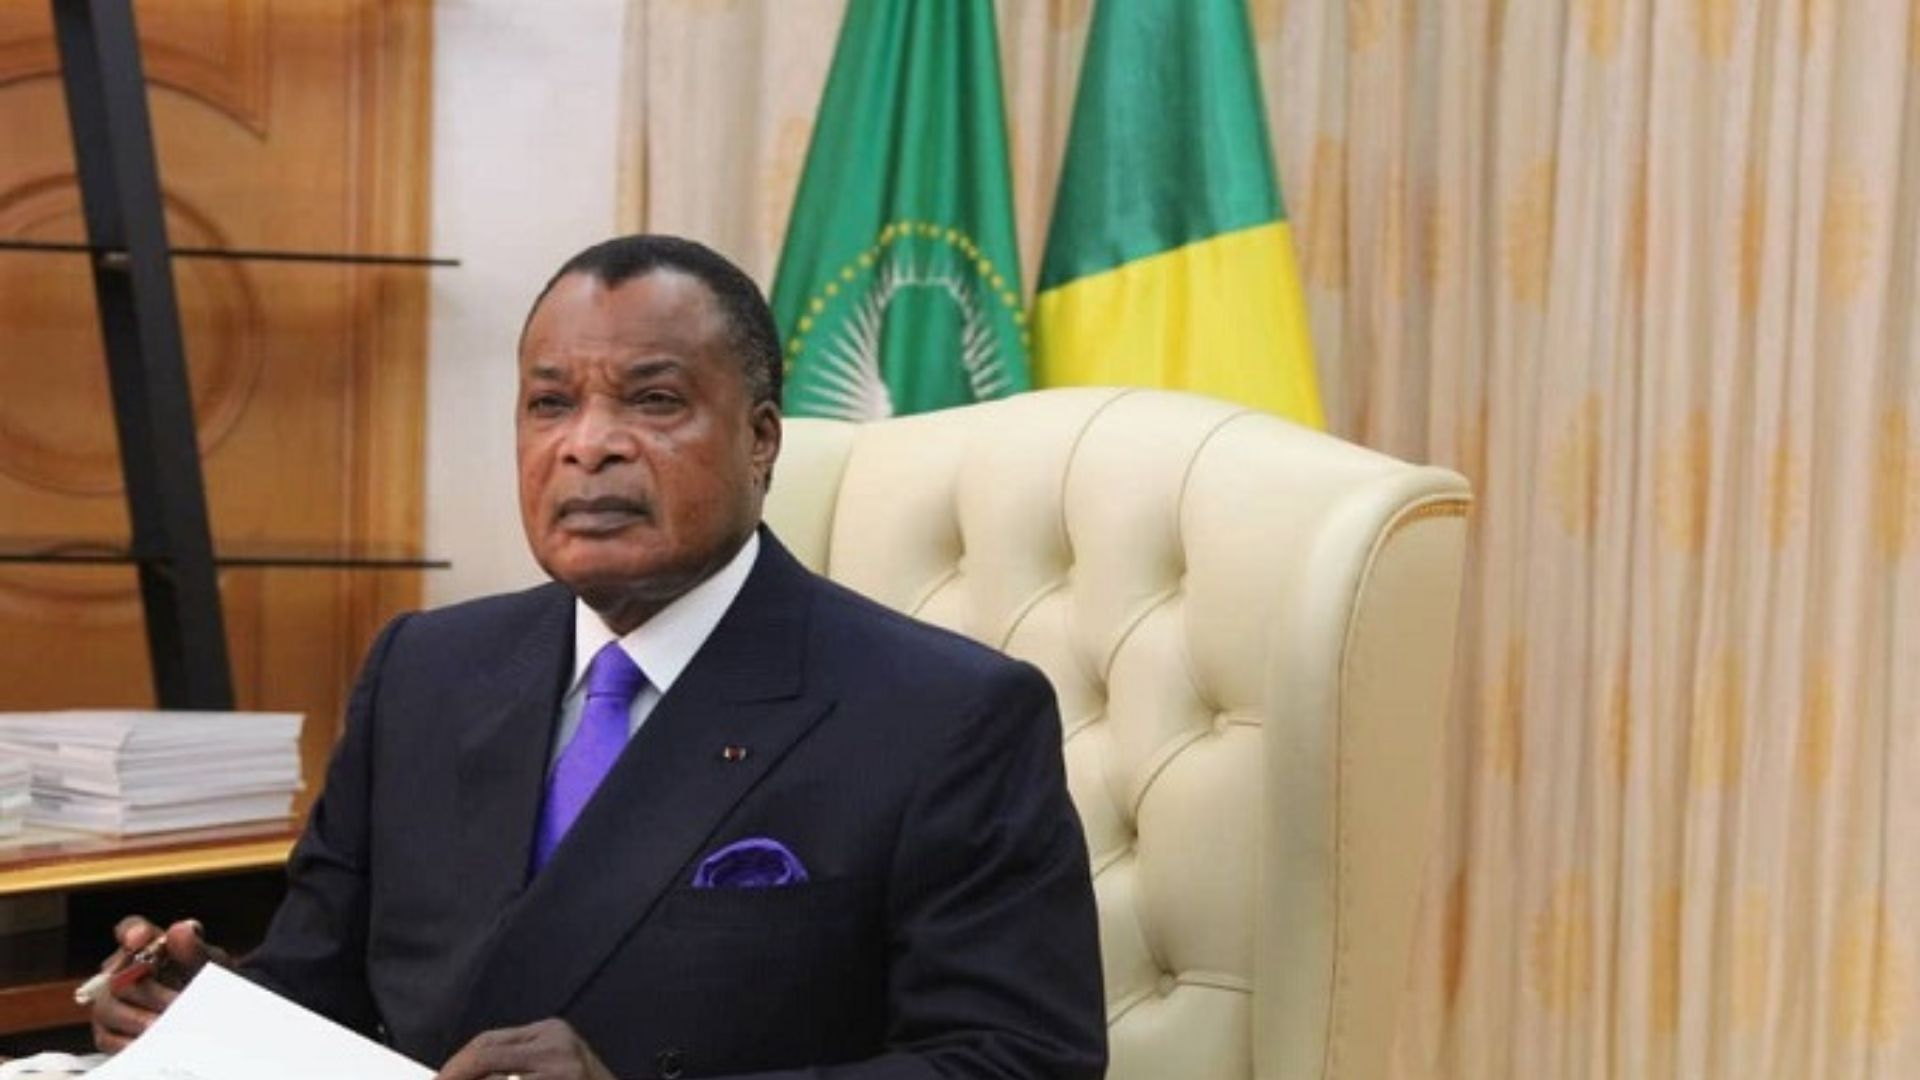 Sassou-Nguesso: "France's relationship with Africa must evolve